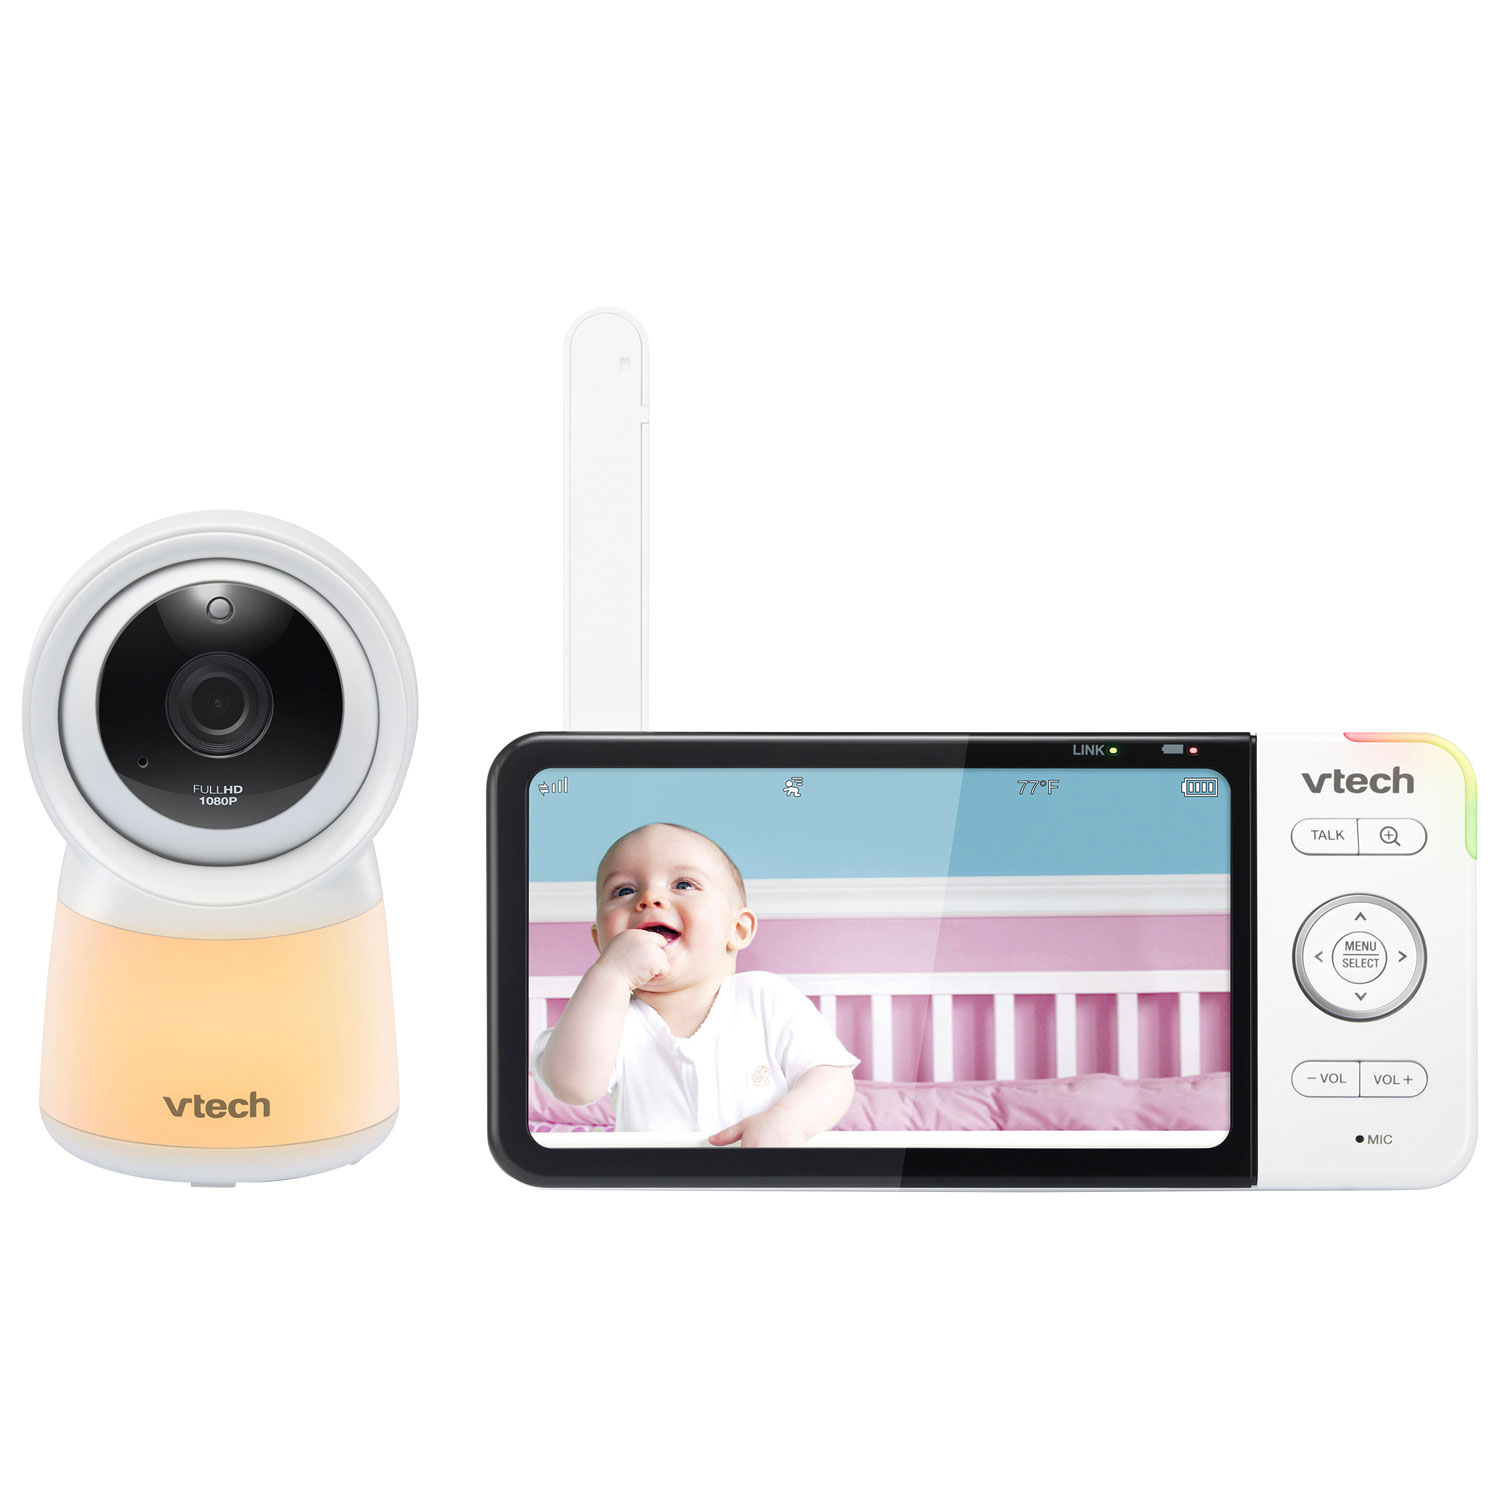 VTech 5" Video Baby Monitor with Night Light, Night Vison & Two-Way Audio (RM5754HD)